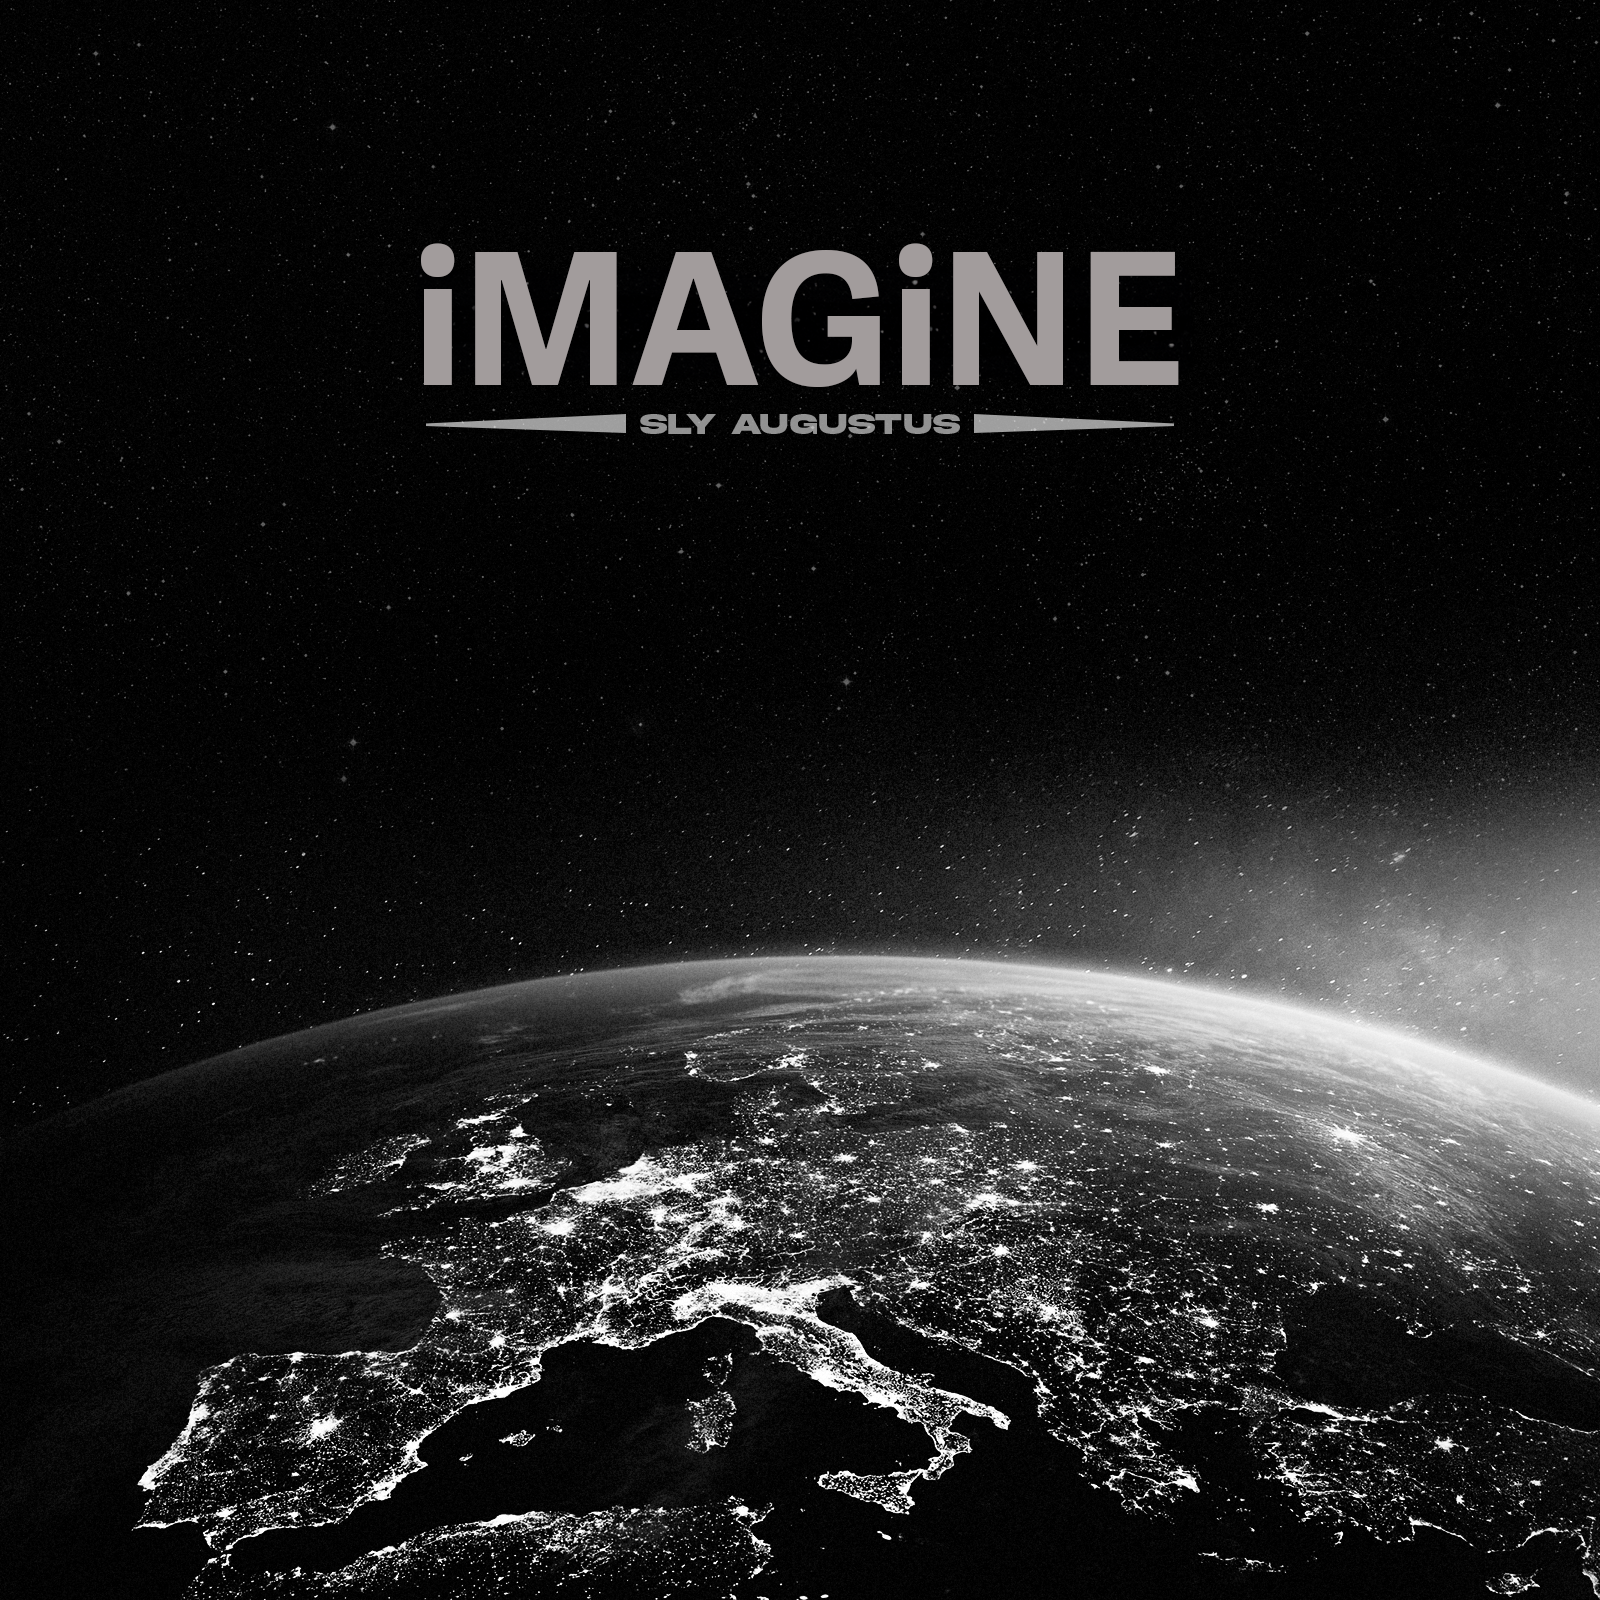 Imagine by Sly Augustus